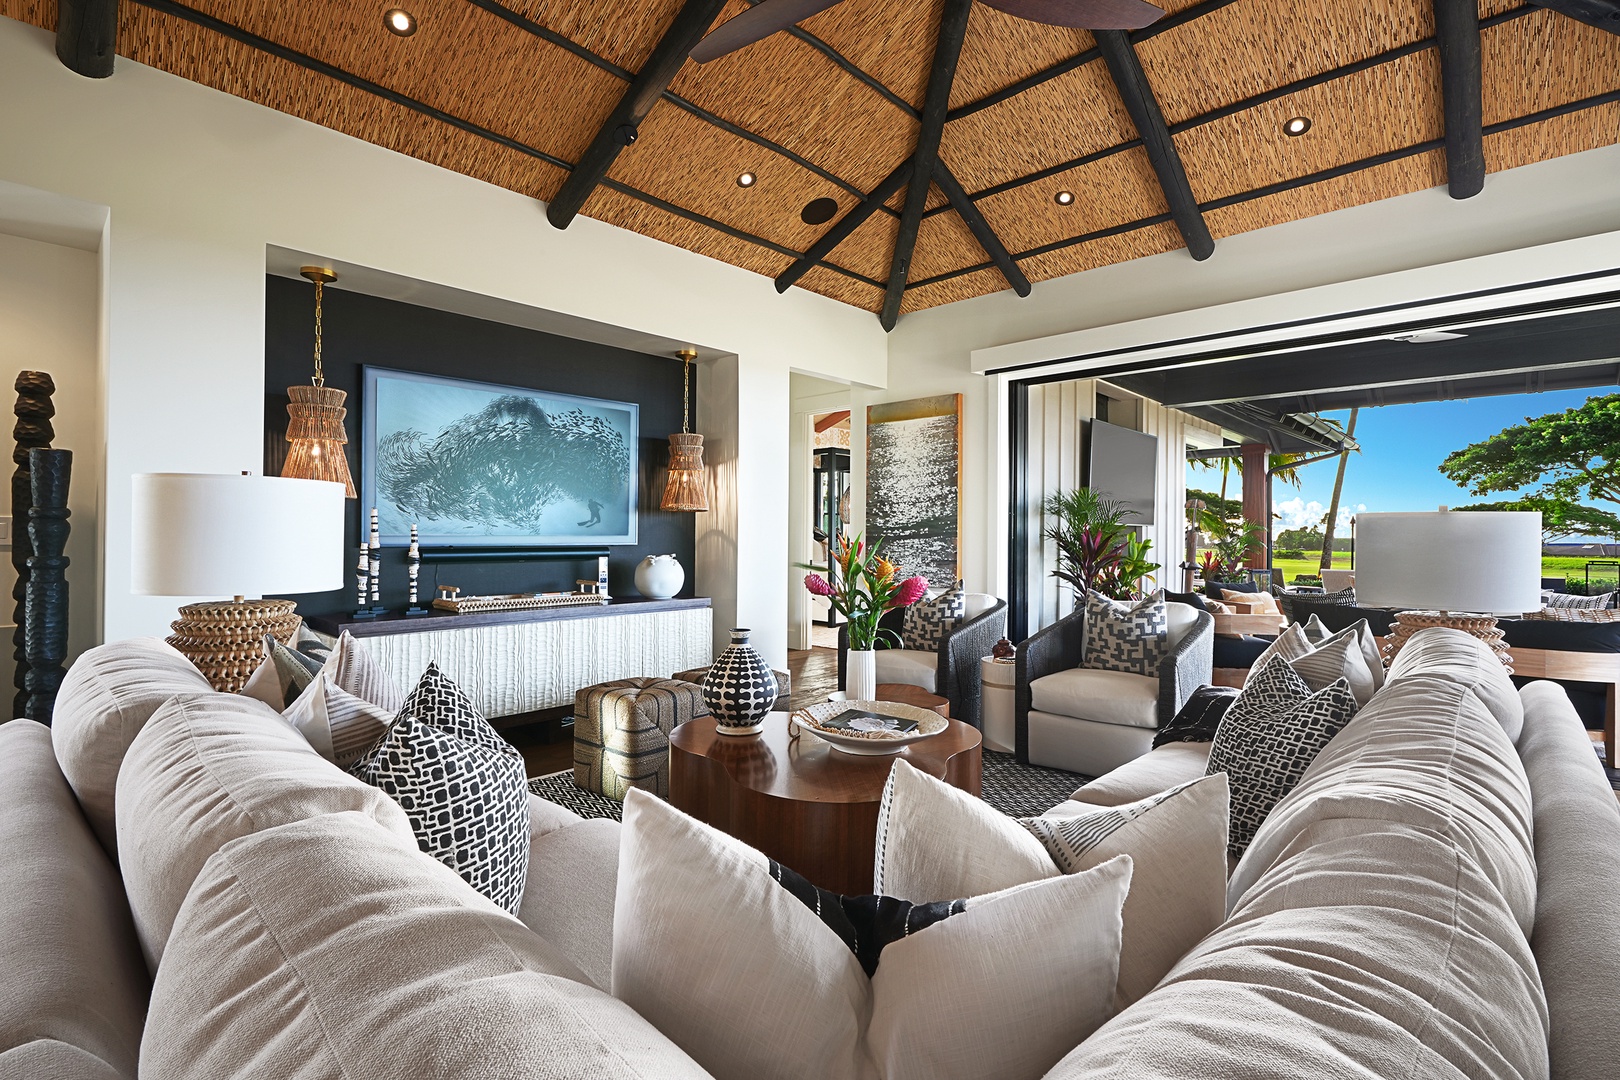 Koloa Vacation Rentals, Hale Pakika at Kukui'ula - The living area with vaulted ceilings features comfortable seating for all, flat screen tv is perfect for visiting or quiet time.